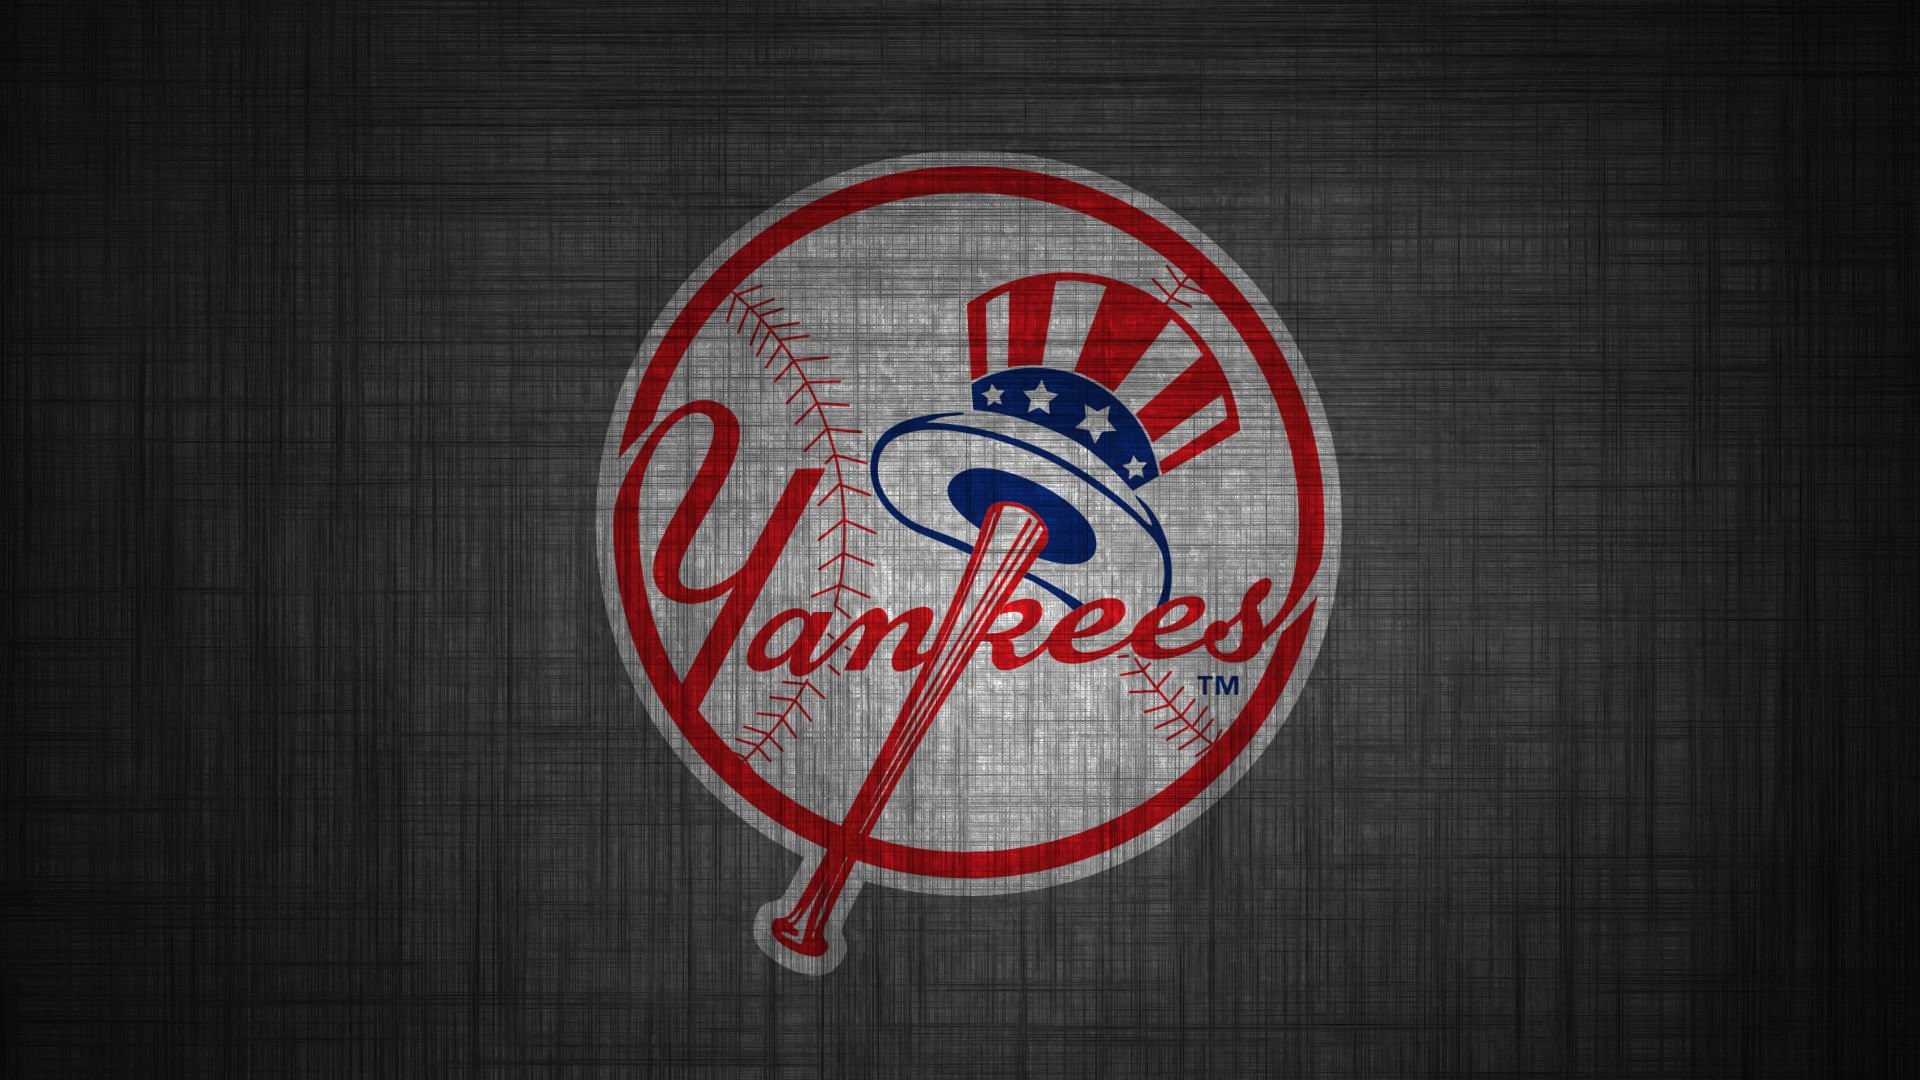 Great New York Yankees Symbol Wallpaper These Are High Quality And High  Definition Hd Wallpapers For Pc Mobile And Tablet Sofa For Lounge New York  Yankees  照片图像